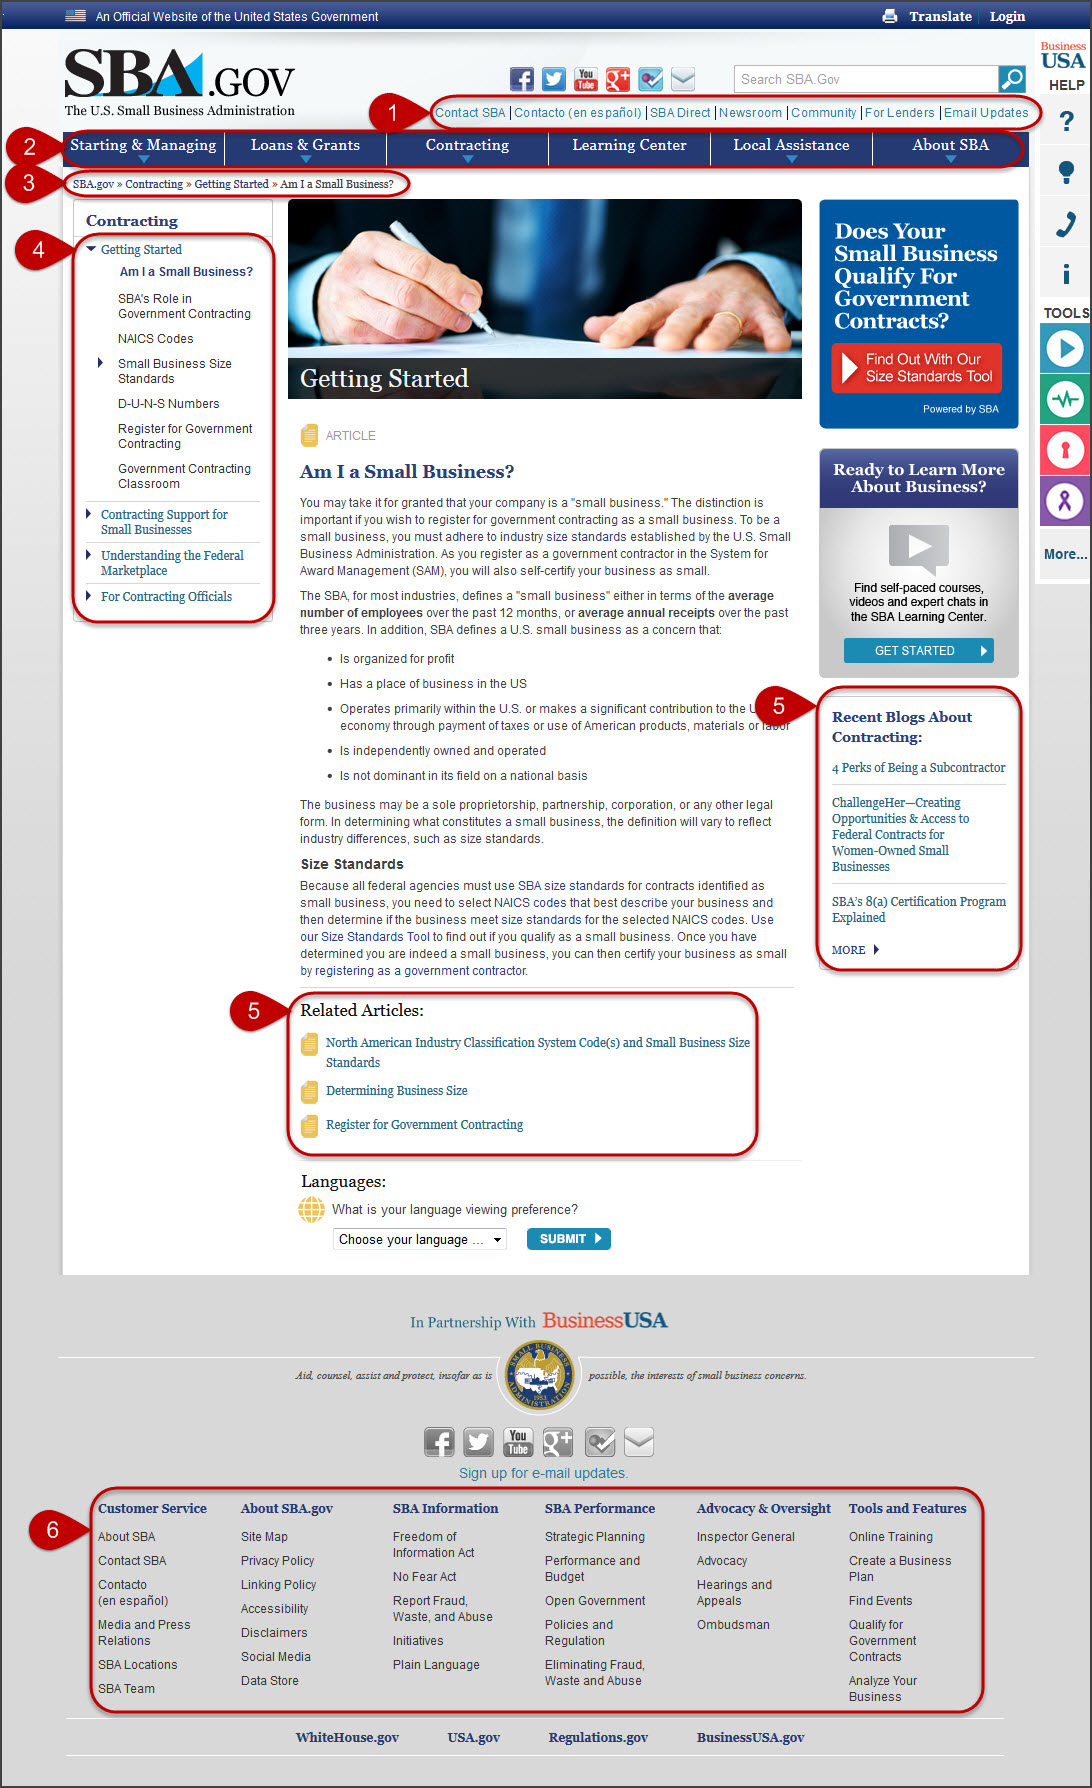 U.S. Small Business Administration homepage, showing navigation types in the layout